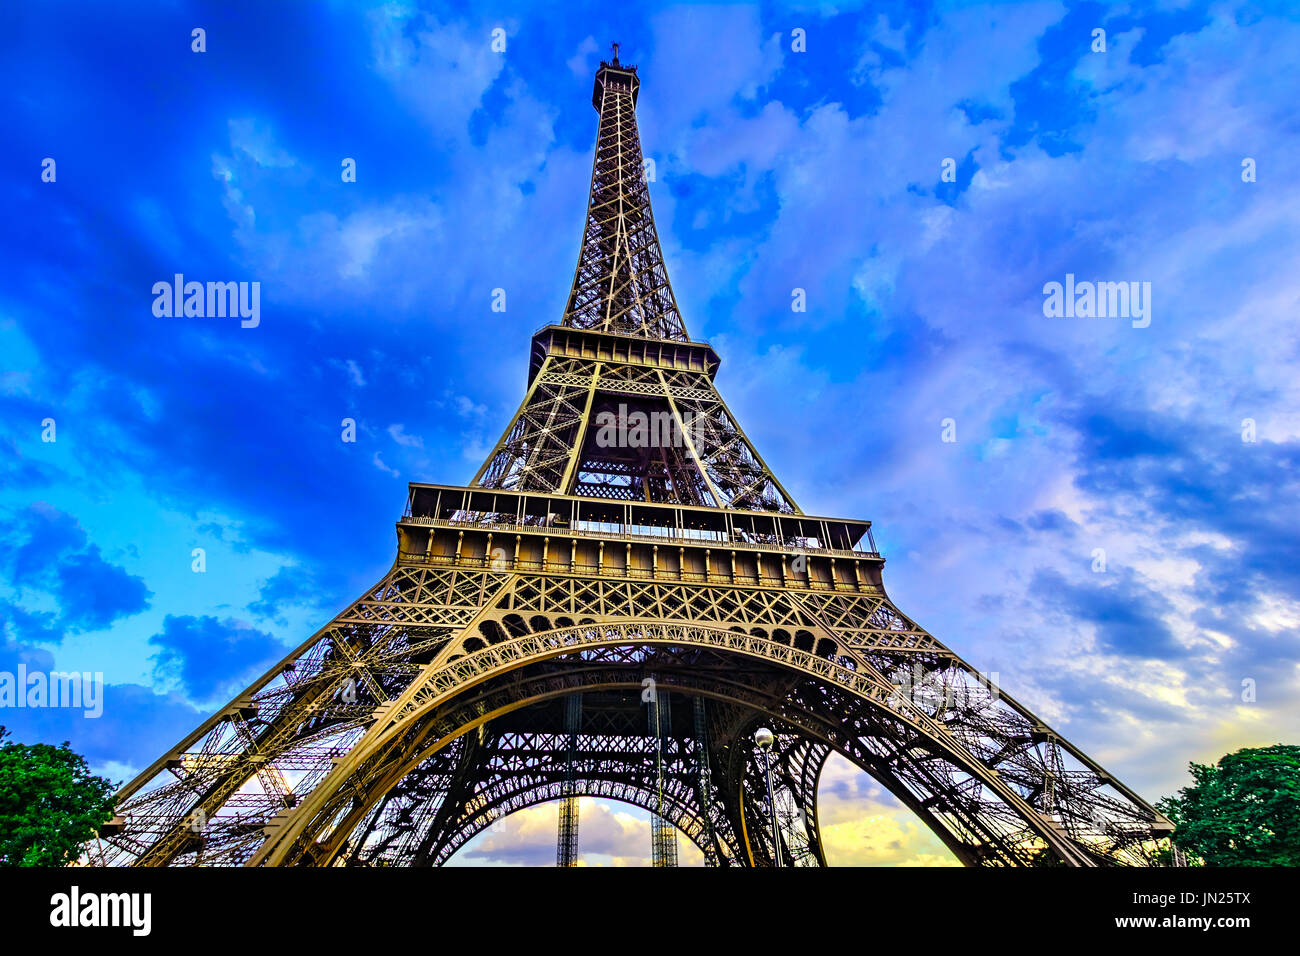 Paris, France, Eiffel Tower, illuminated at sunset The Eiffel Tower was built in 1889, and is a popular attraction for tourists. Stock Photo